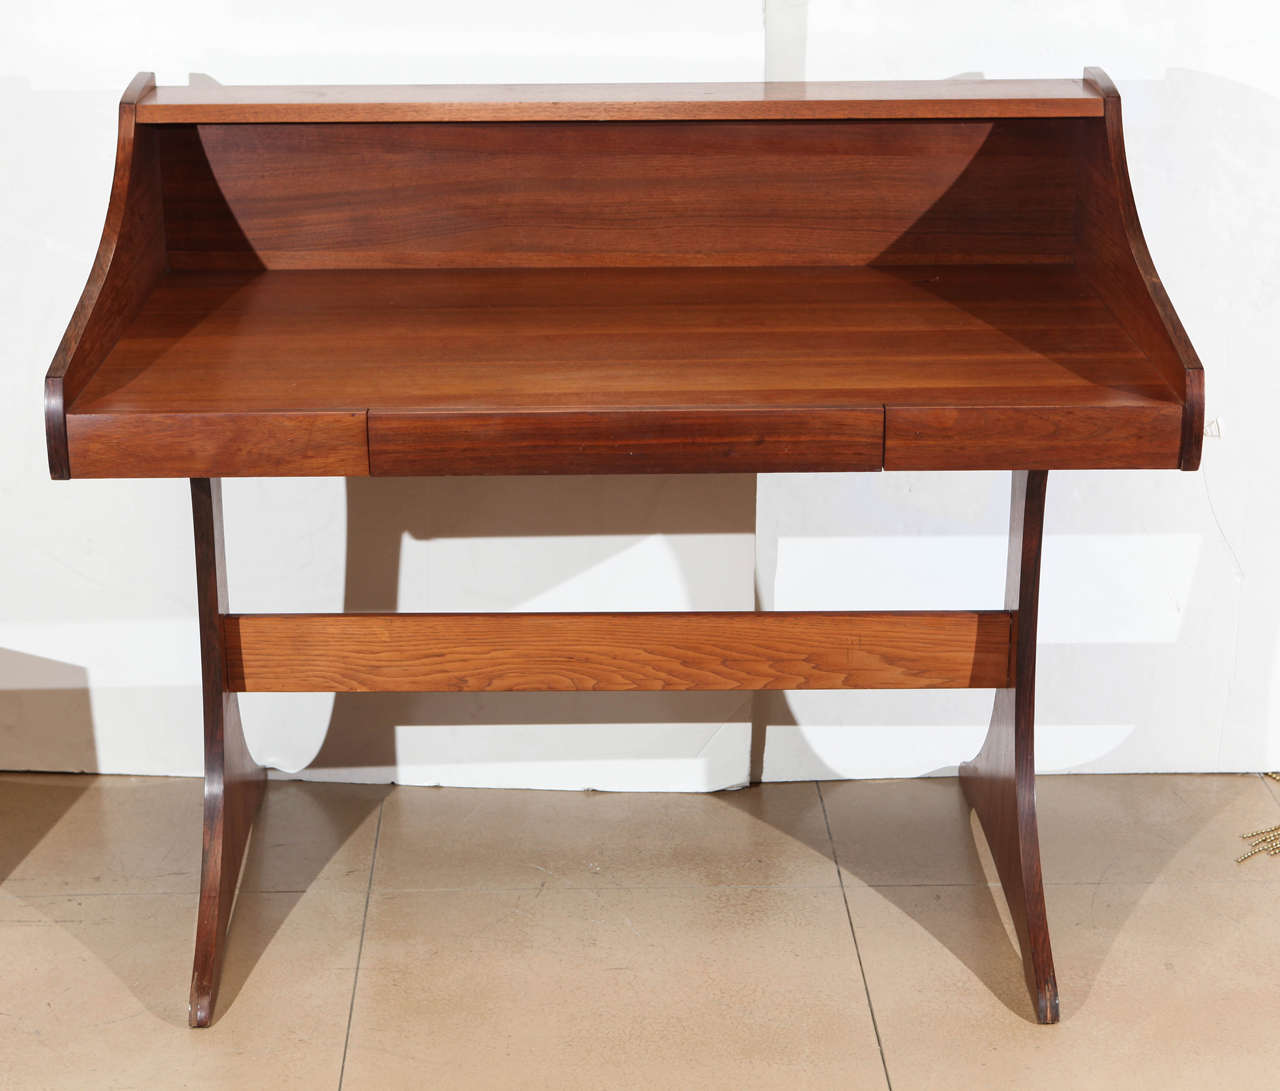 A Mid-Century solid walnut desk made by Kroehler from the 1970s with open shelf detail and a single drawer.